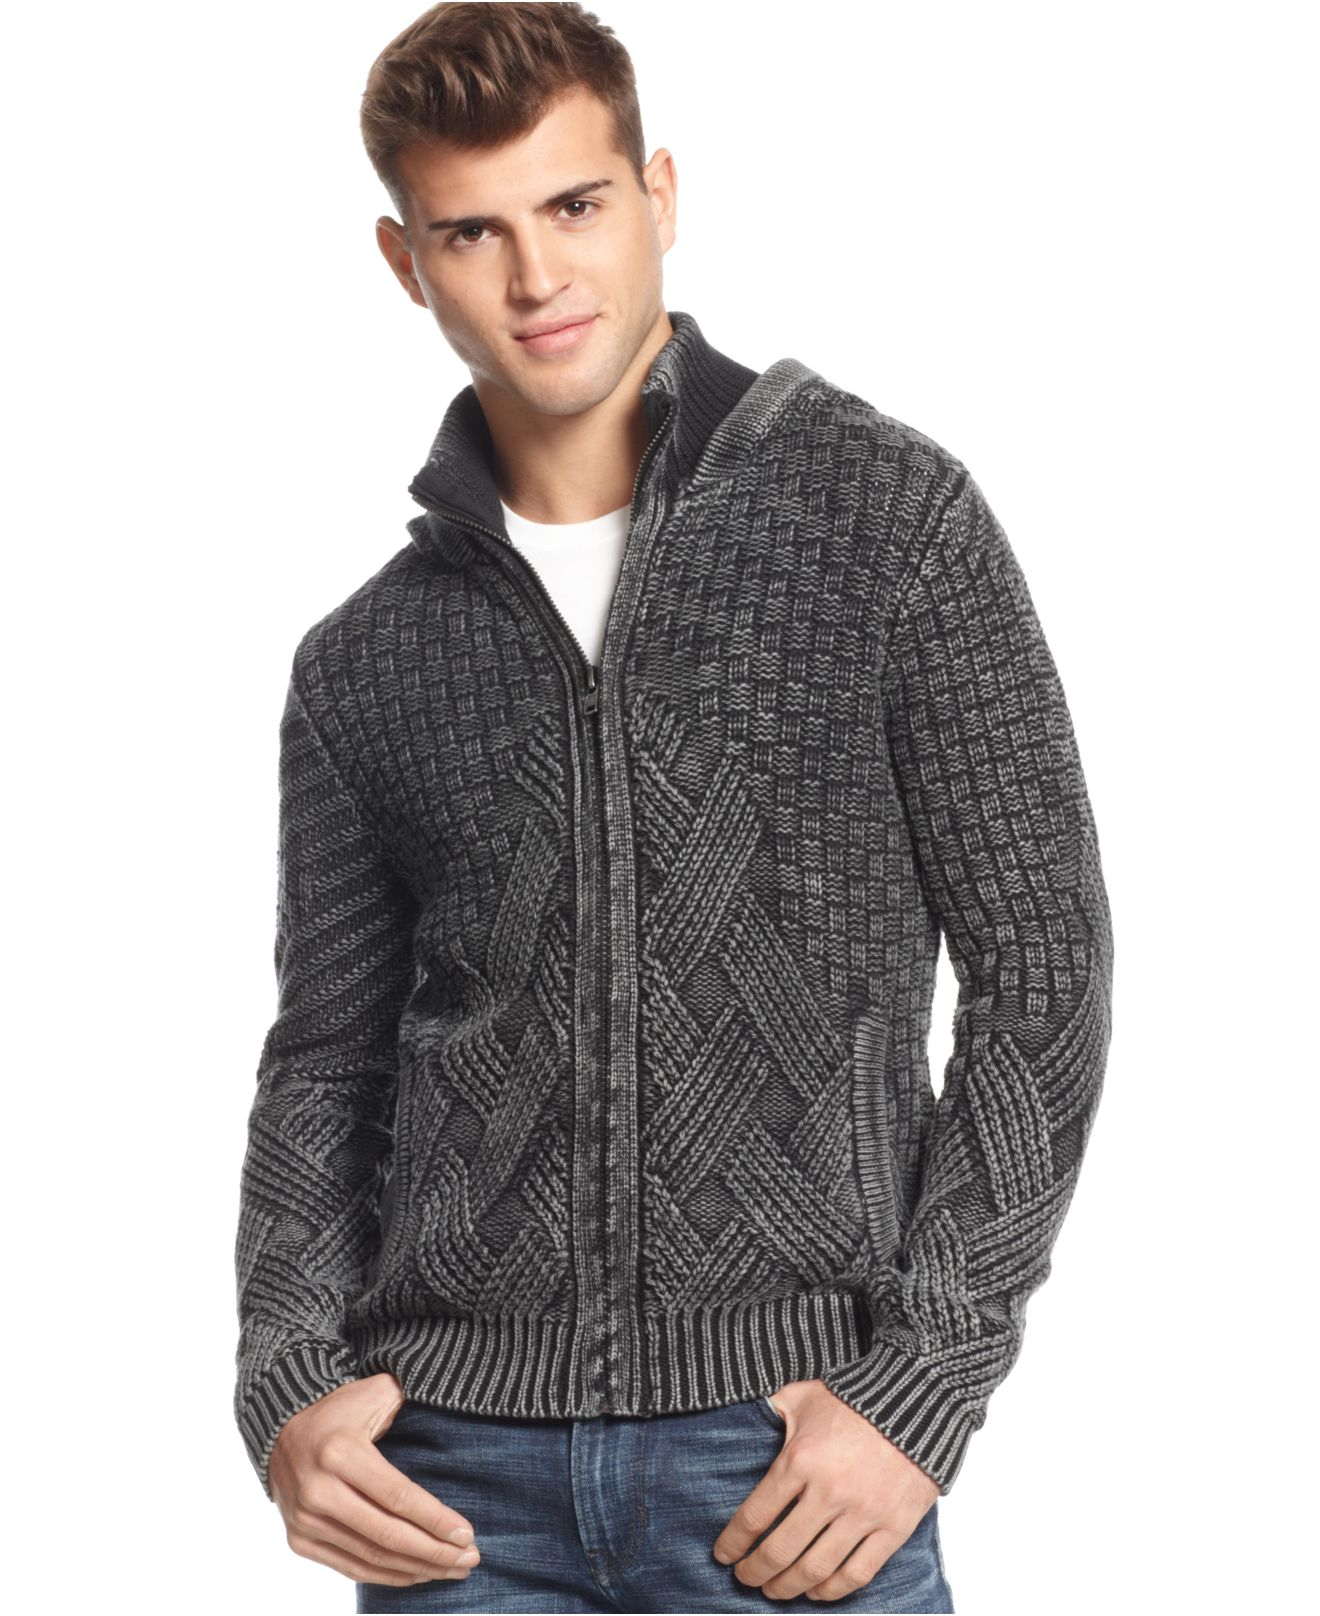 Lyst - Guess Dawson Mix-Stitch Hooded Sweater in Black for Men